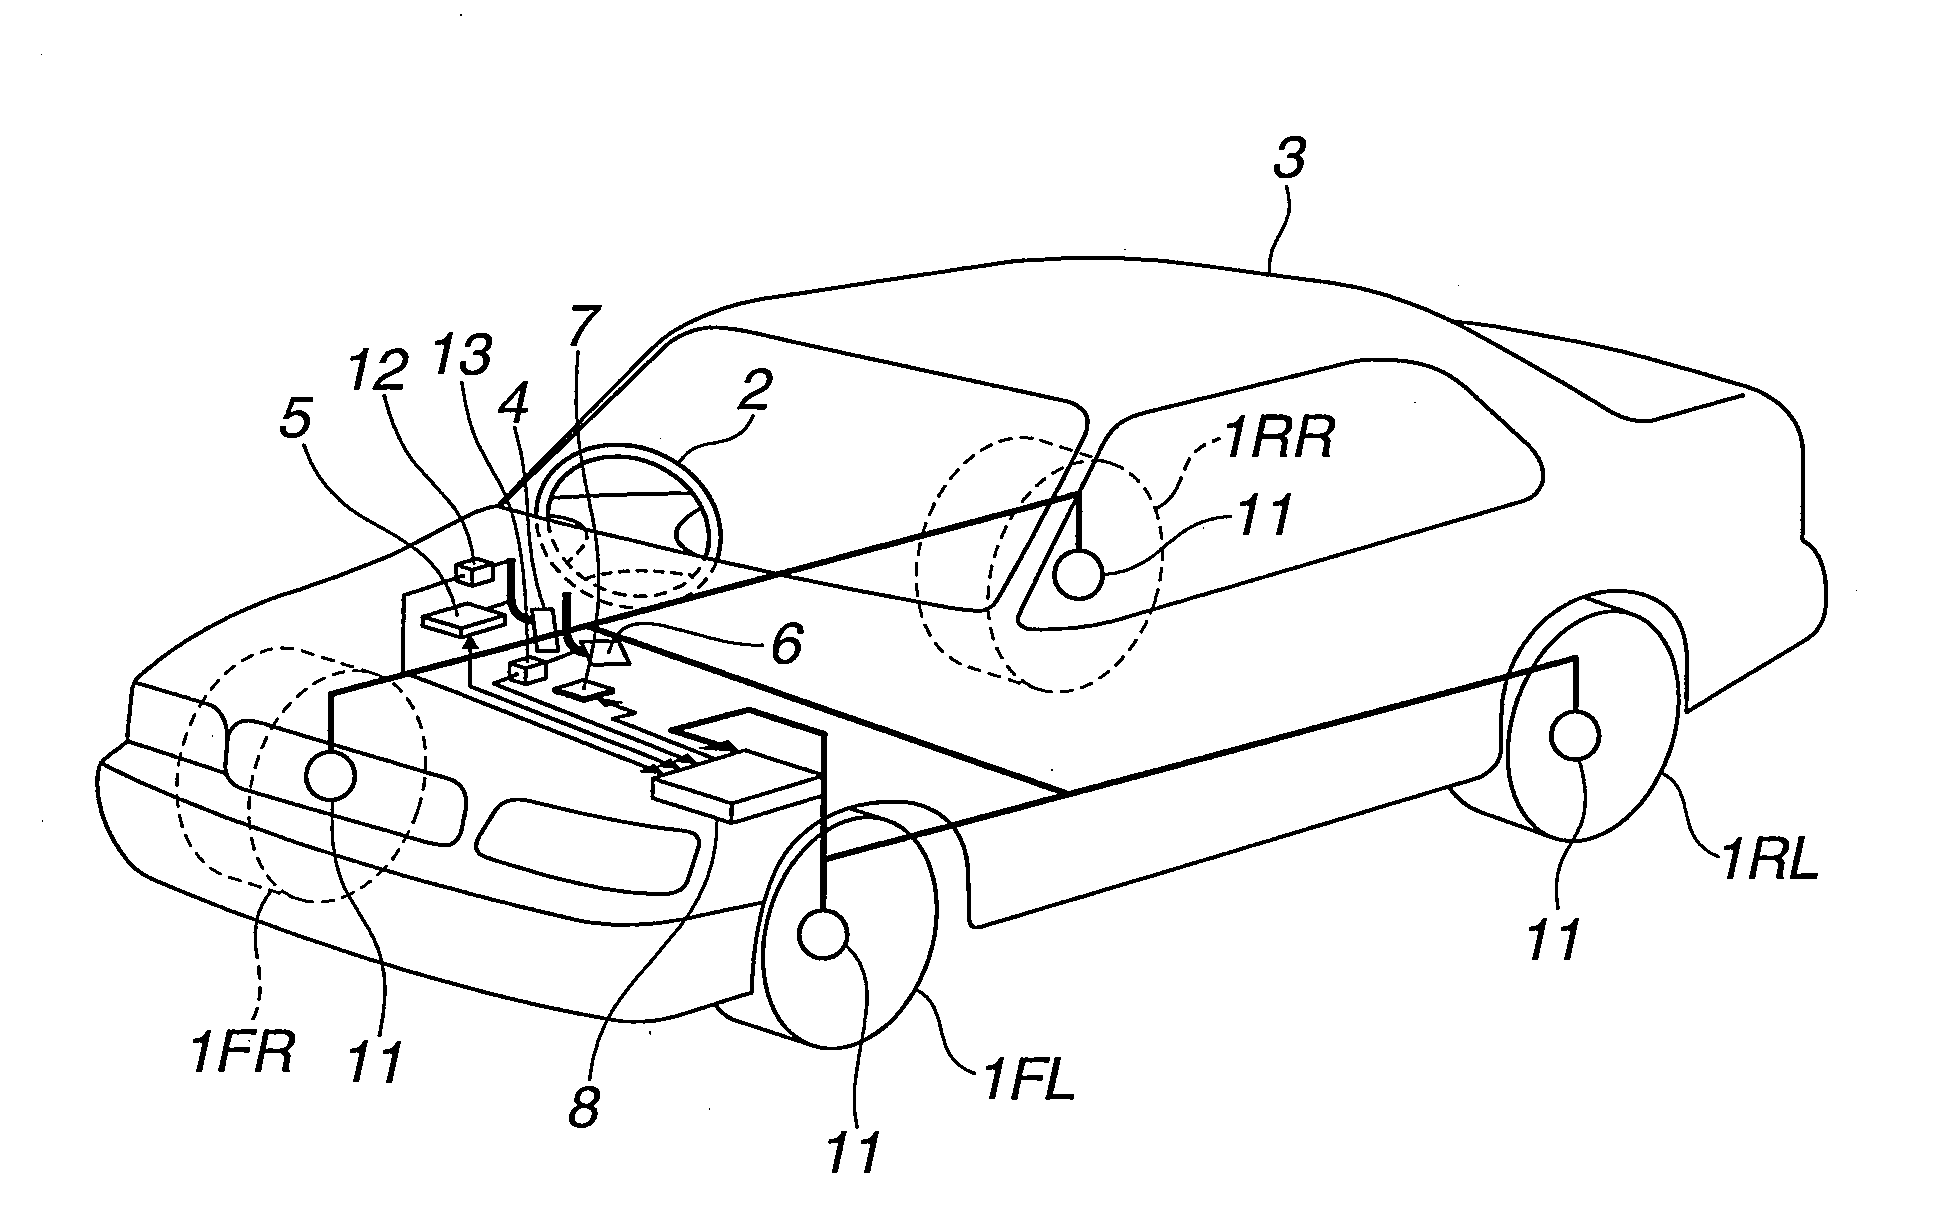 Vehicle body vibration damping control device